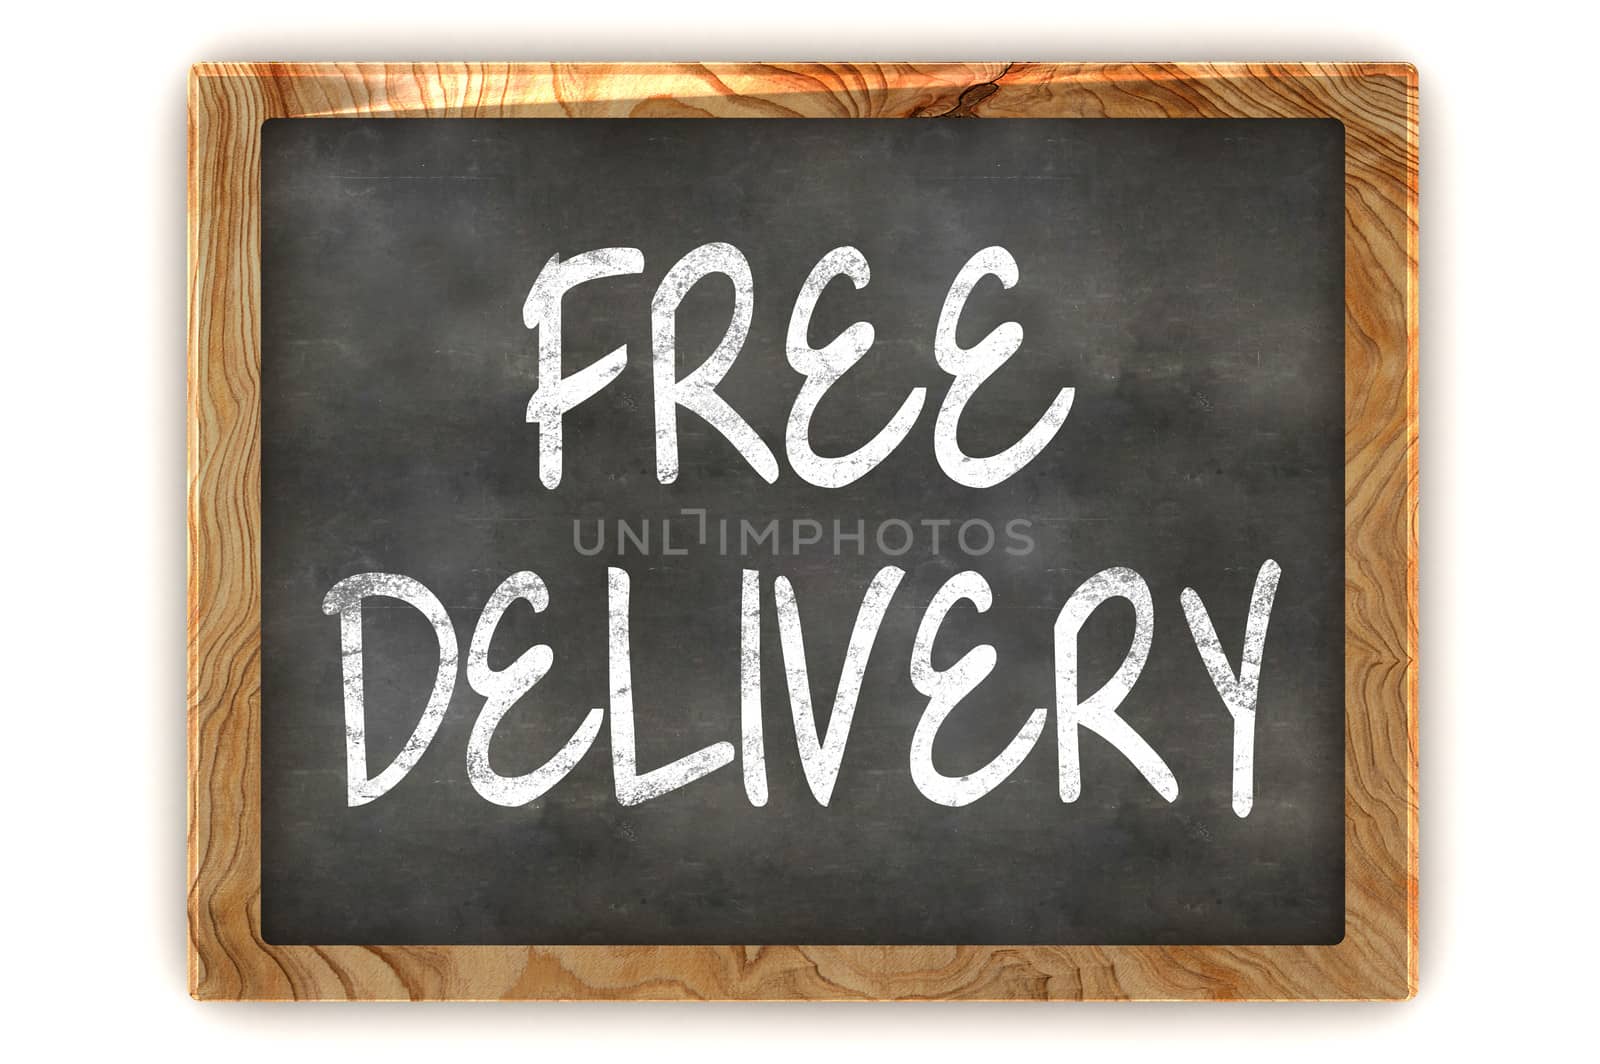 A Colourful 3d Rendered Illustration of a Blackboard Showing Free Delivery